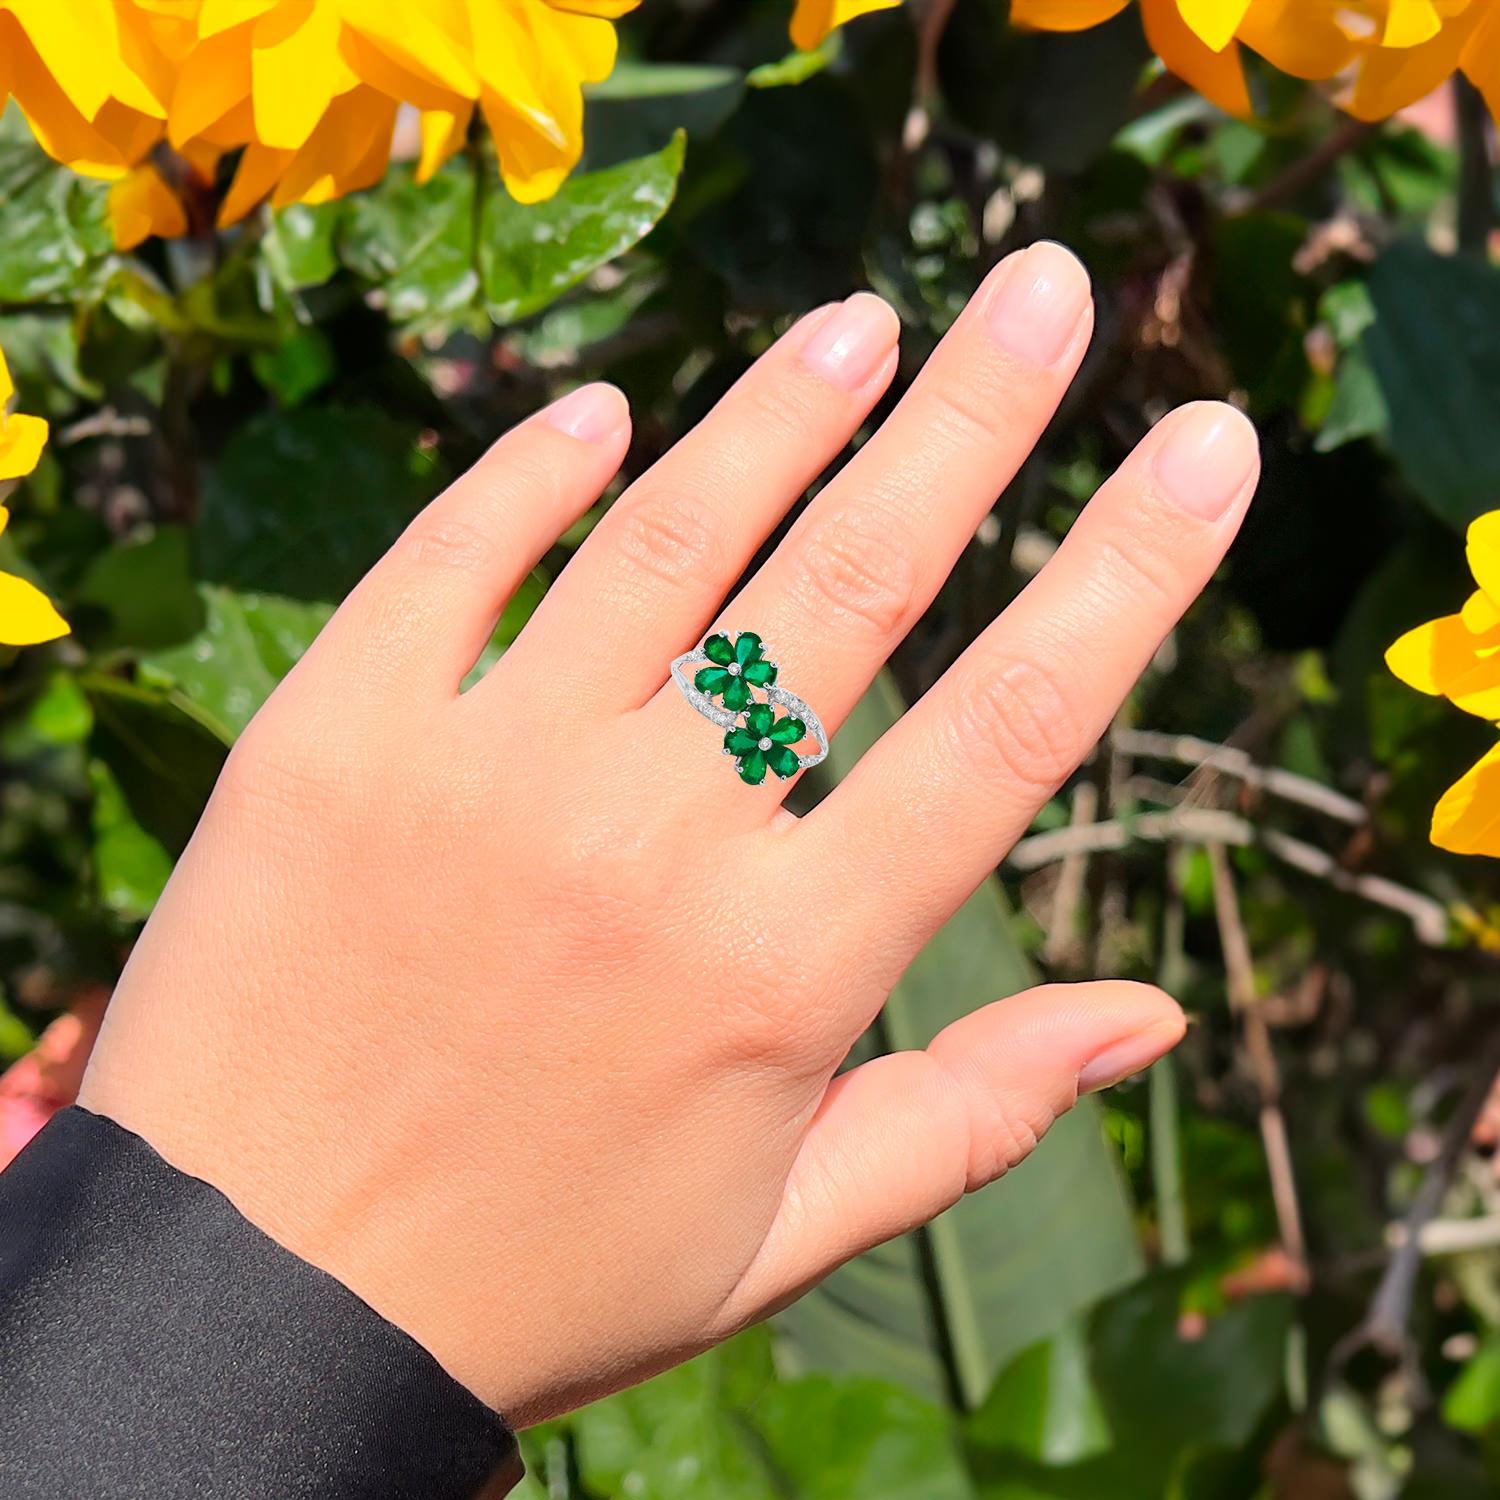 Pear Cut Emerald Flower Ring Diamond Setting 1.42 Carats 18K White Gold For Sale